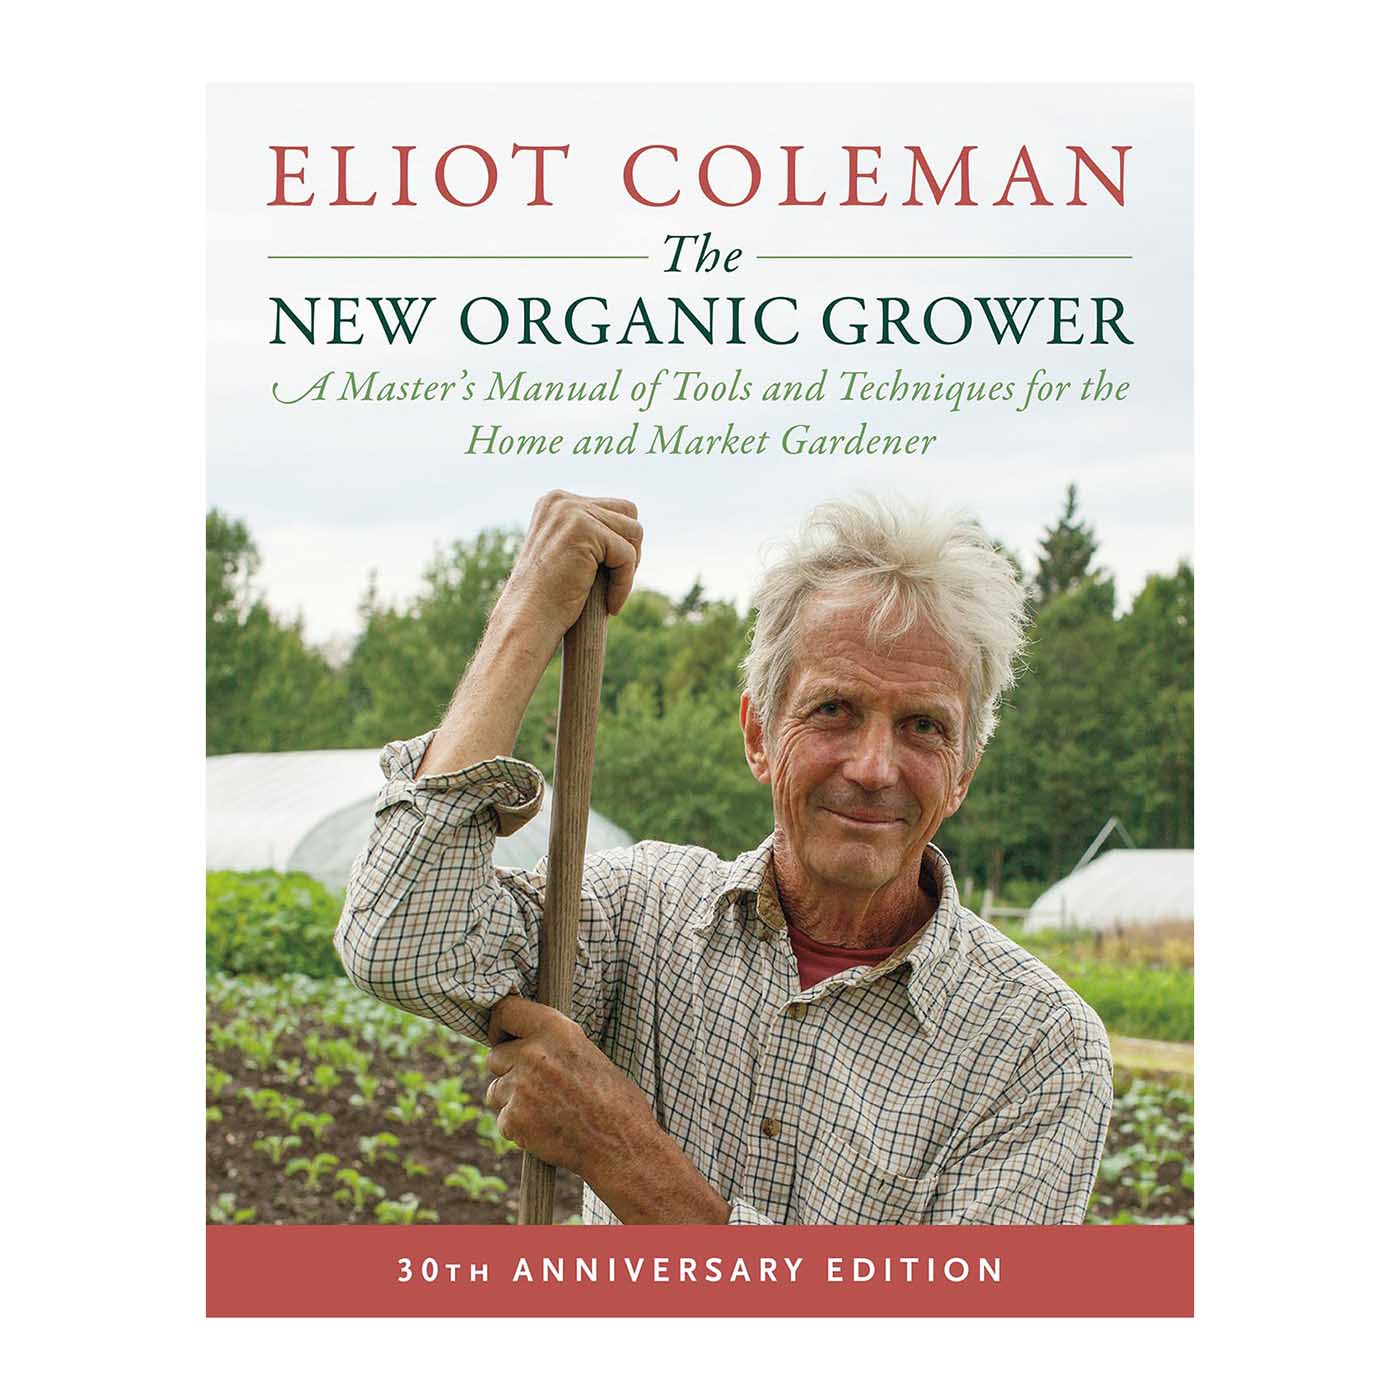 The New Organic Grower, 3rd Edition: A Master's Manual of Tools and Techniques for the Home and Market Gardener